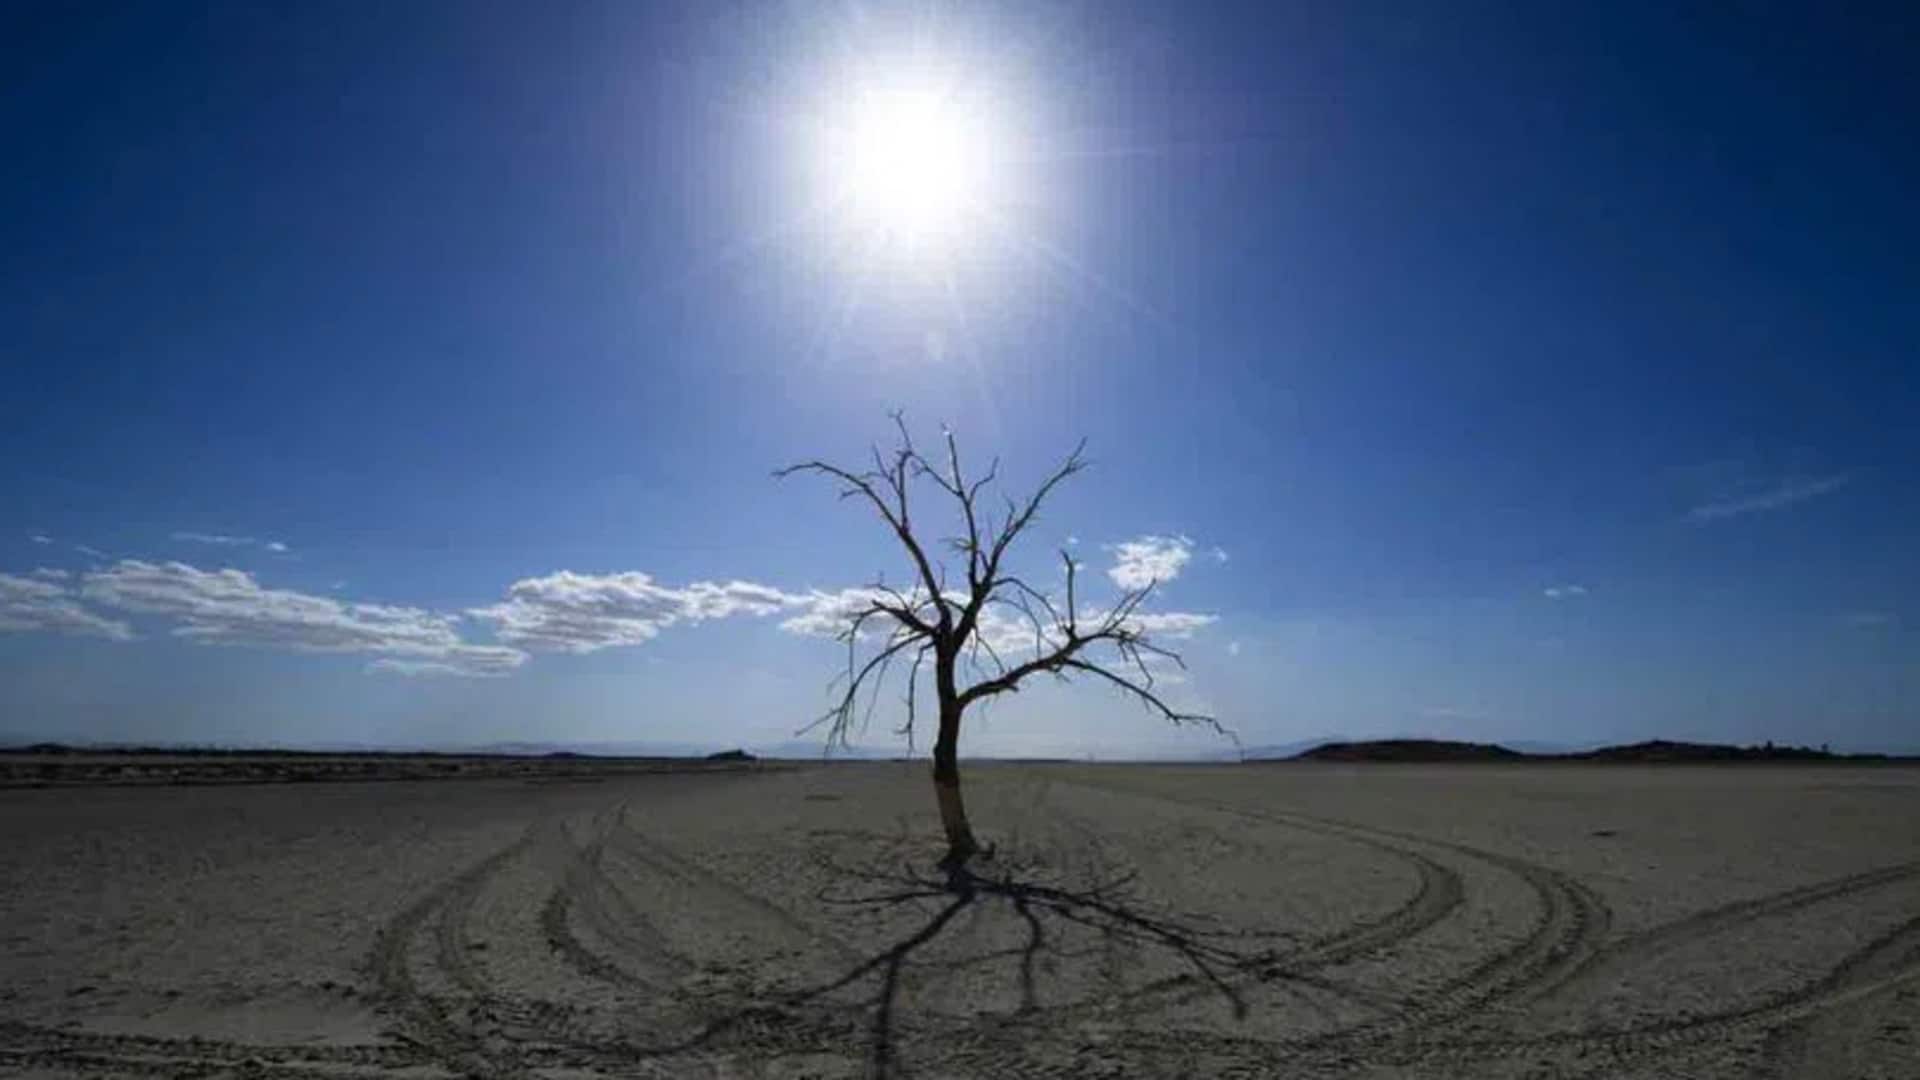 2023 is likely to be the hottest year on record